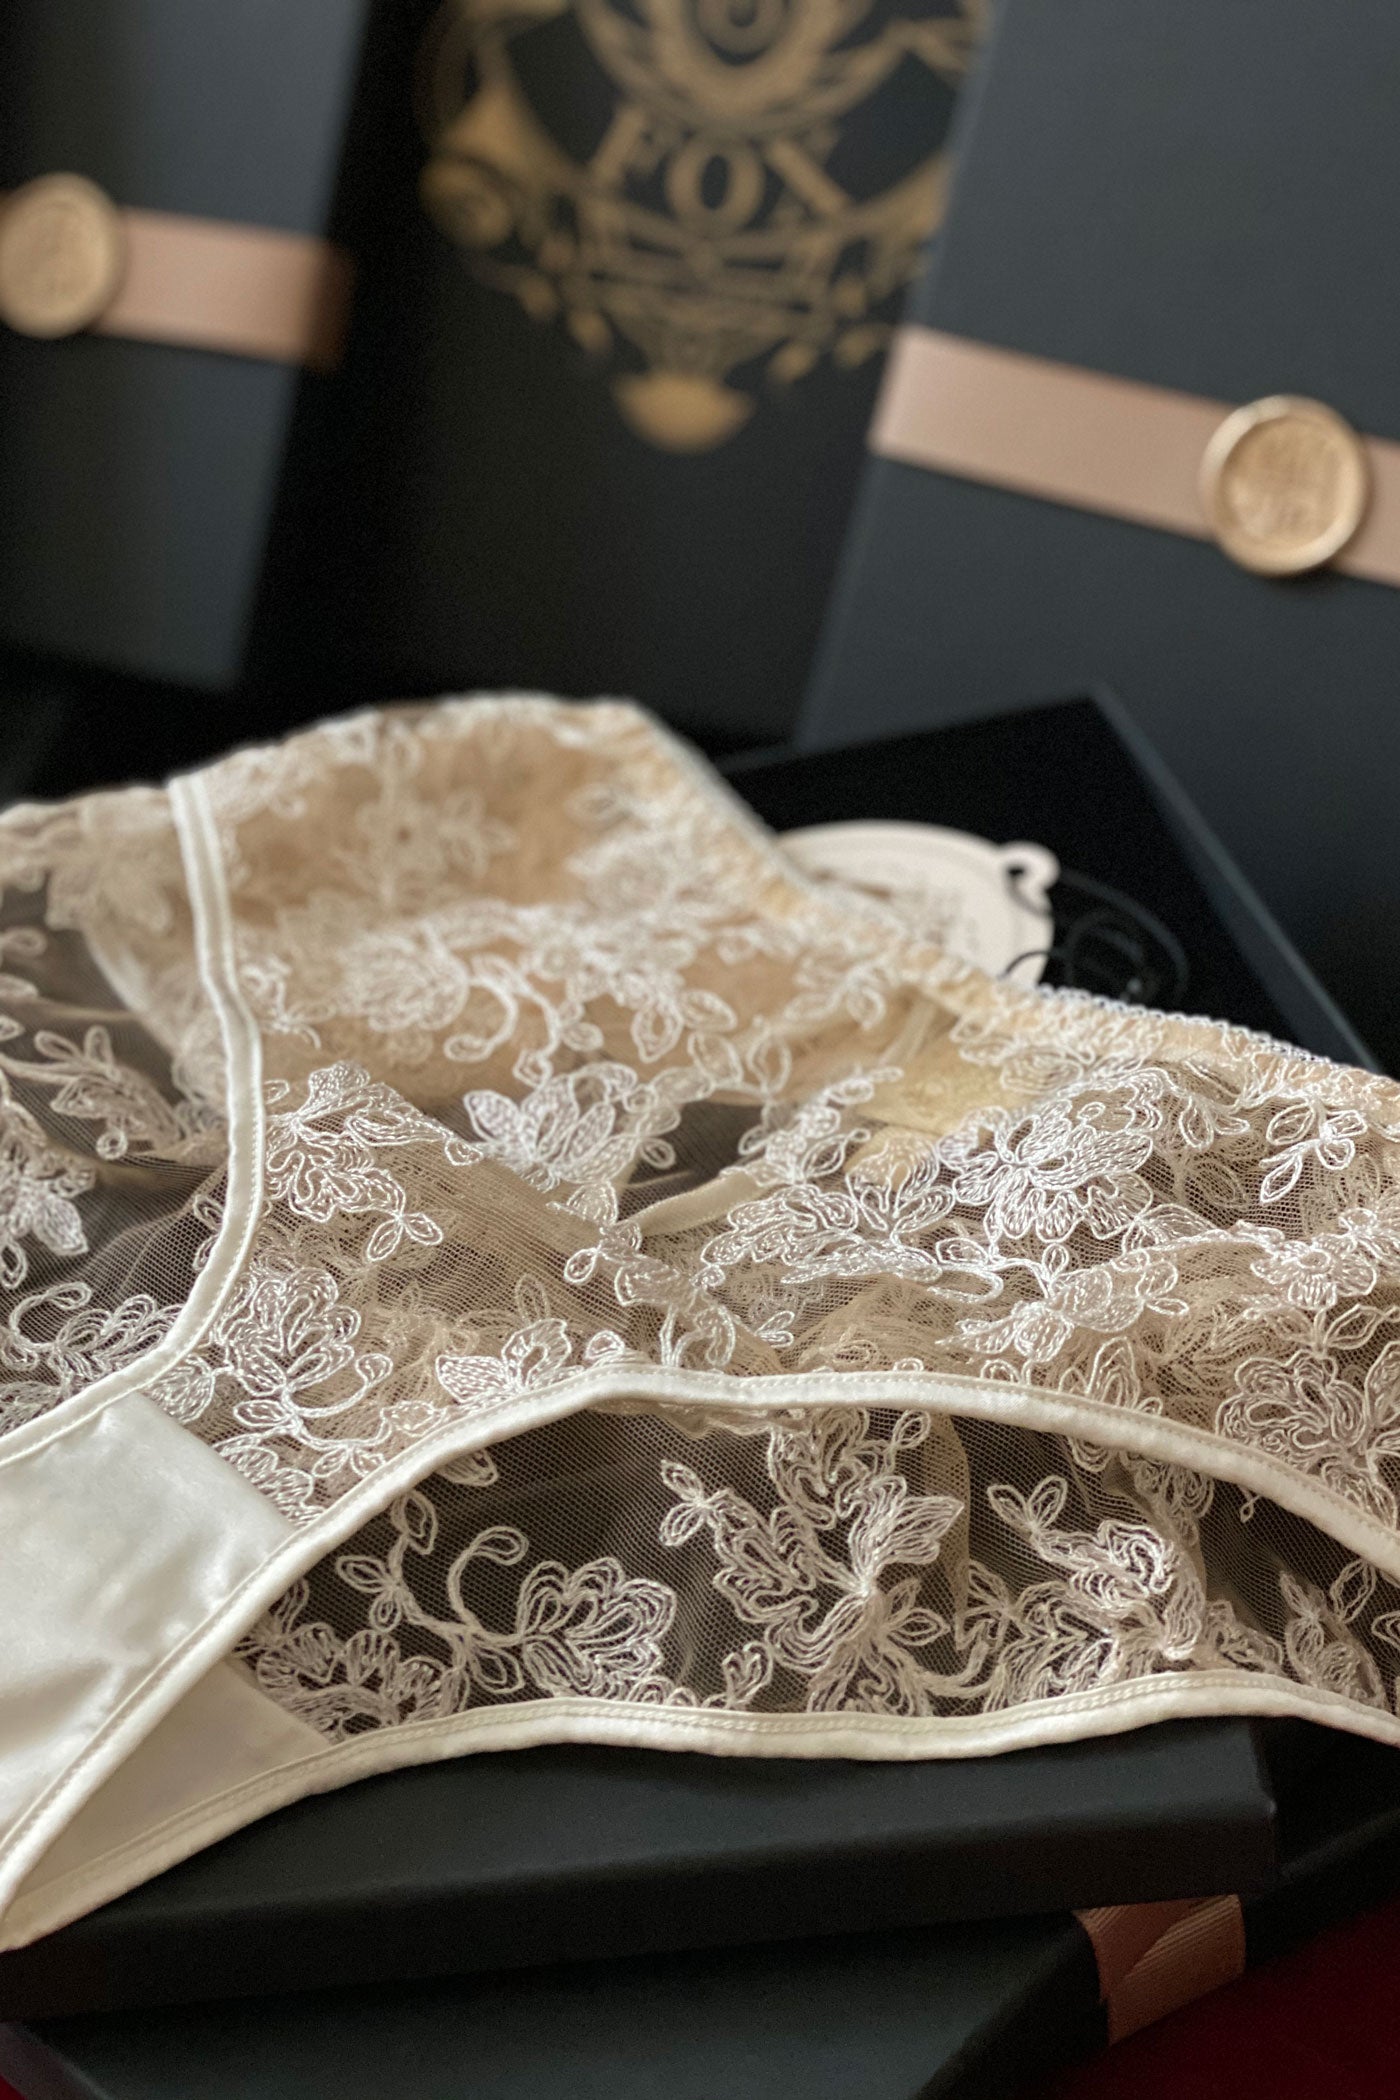 Sheer ivory lace knickers in luxury lingerie gift box set